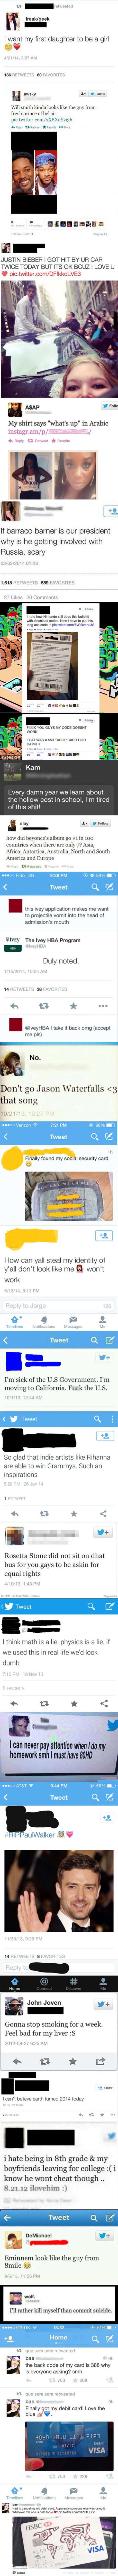 23 of the dumbest tweets ever tweeted, twitter, stupid, fail